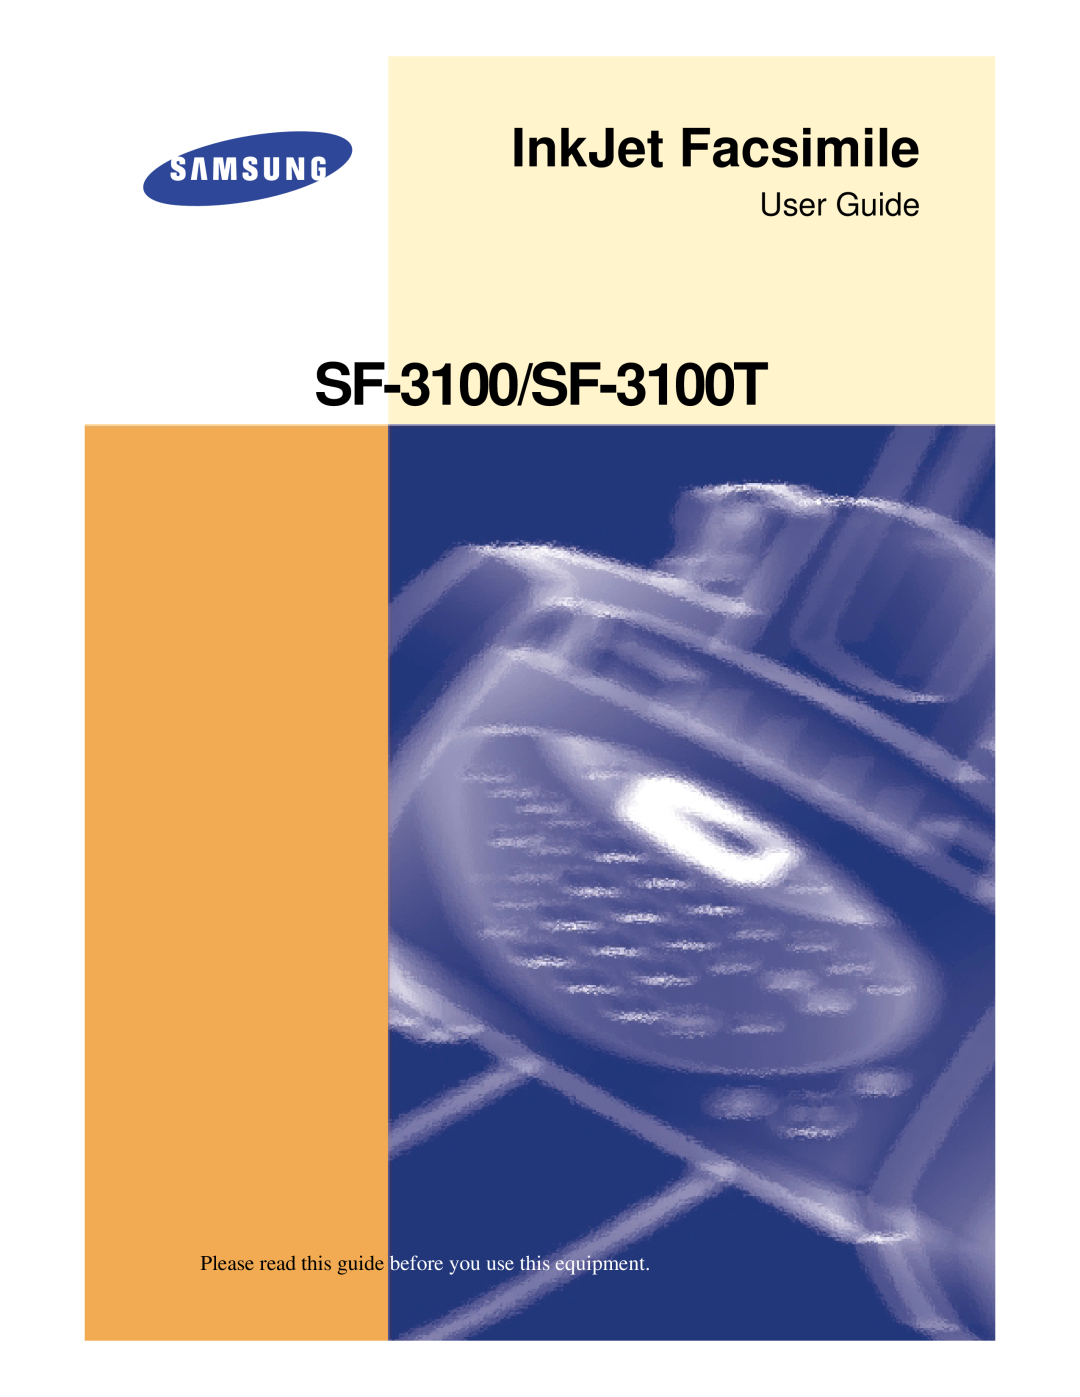 Samsung manual SF-3100/SF-3100T, InkJet Facsimile, User Guide, Please read this guide before you use this equipment 